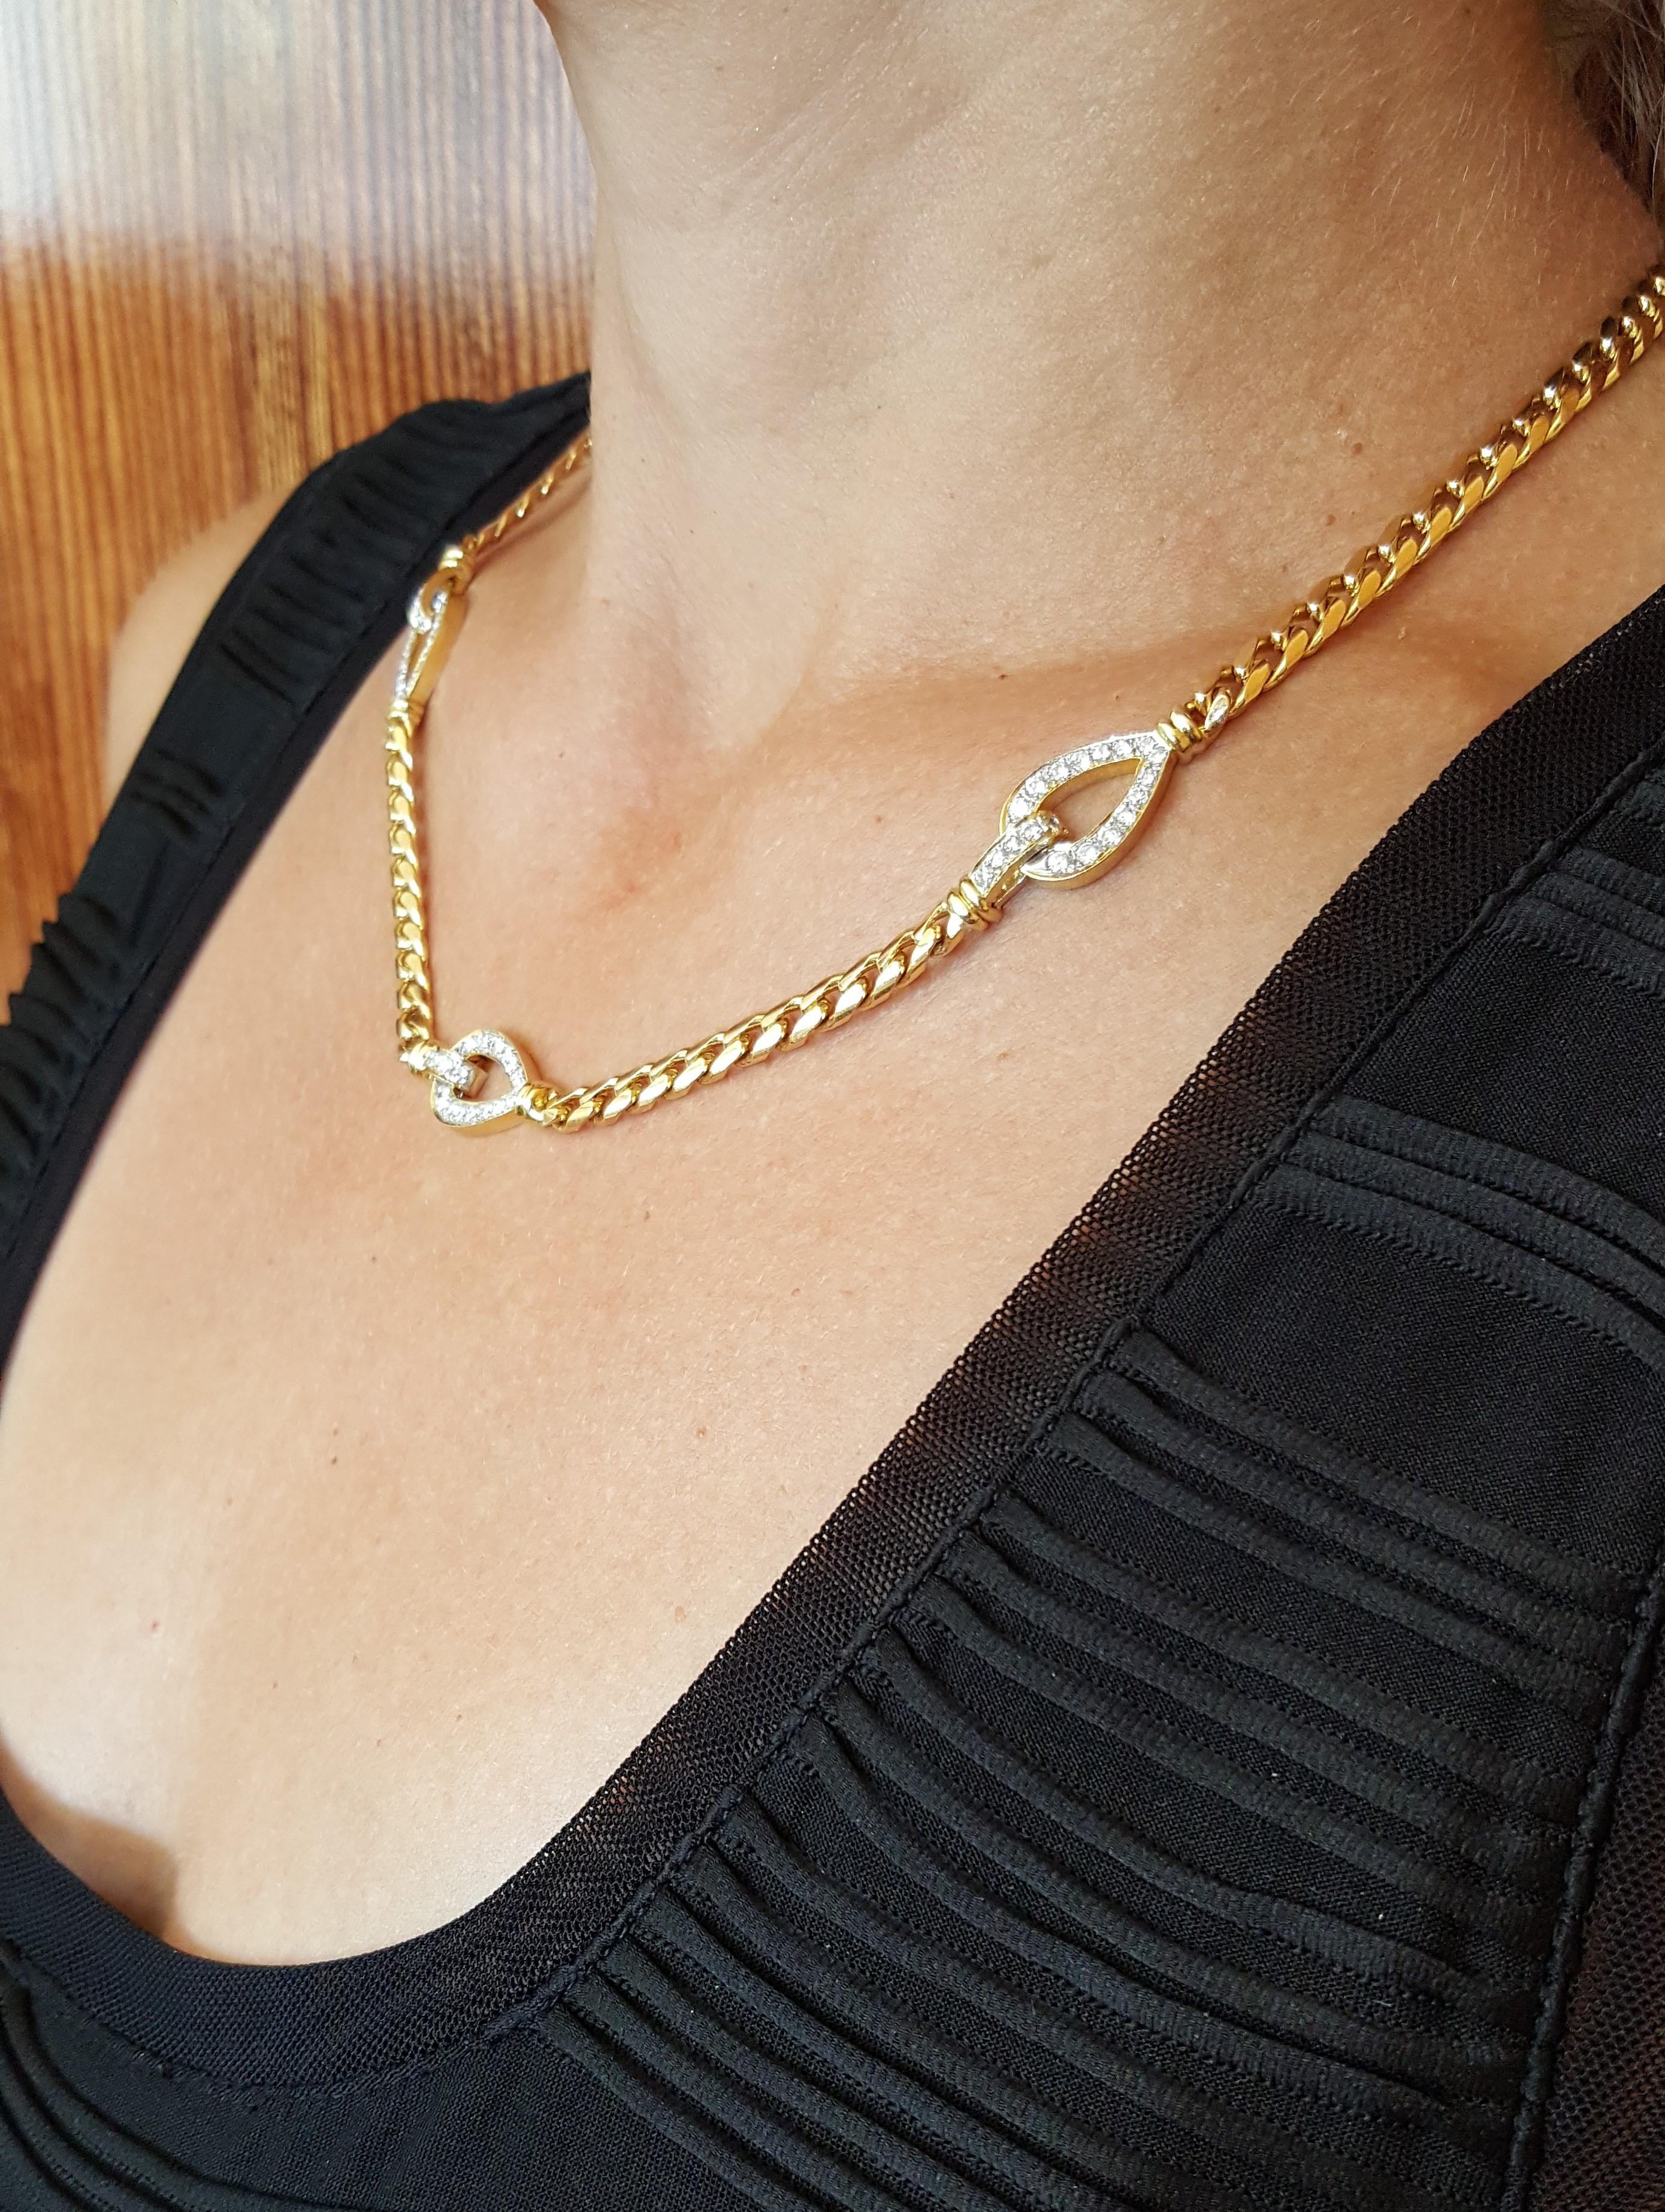 18kt yellow gold 1.77cttw diamond curb-link 19-inch necklace (diamond weight is a close approximation-based measurement).  The necklace link is solid 18kt gold, 48 grams, 4.8mm wide, stamped 18kt 750, and secured with a fold-clasp and figure-8